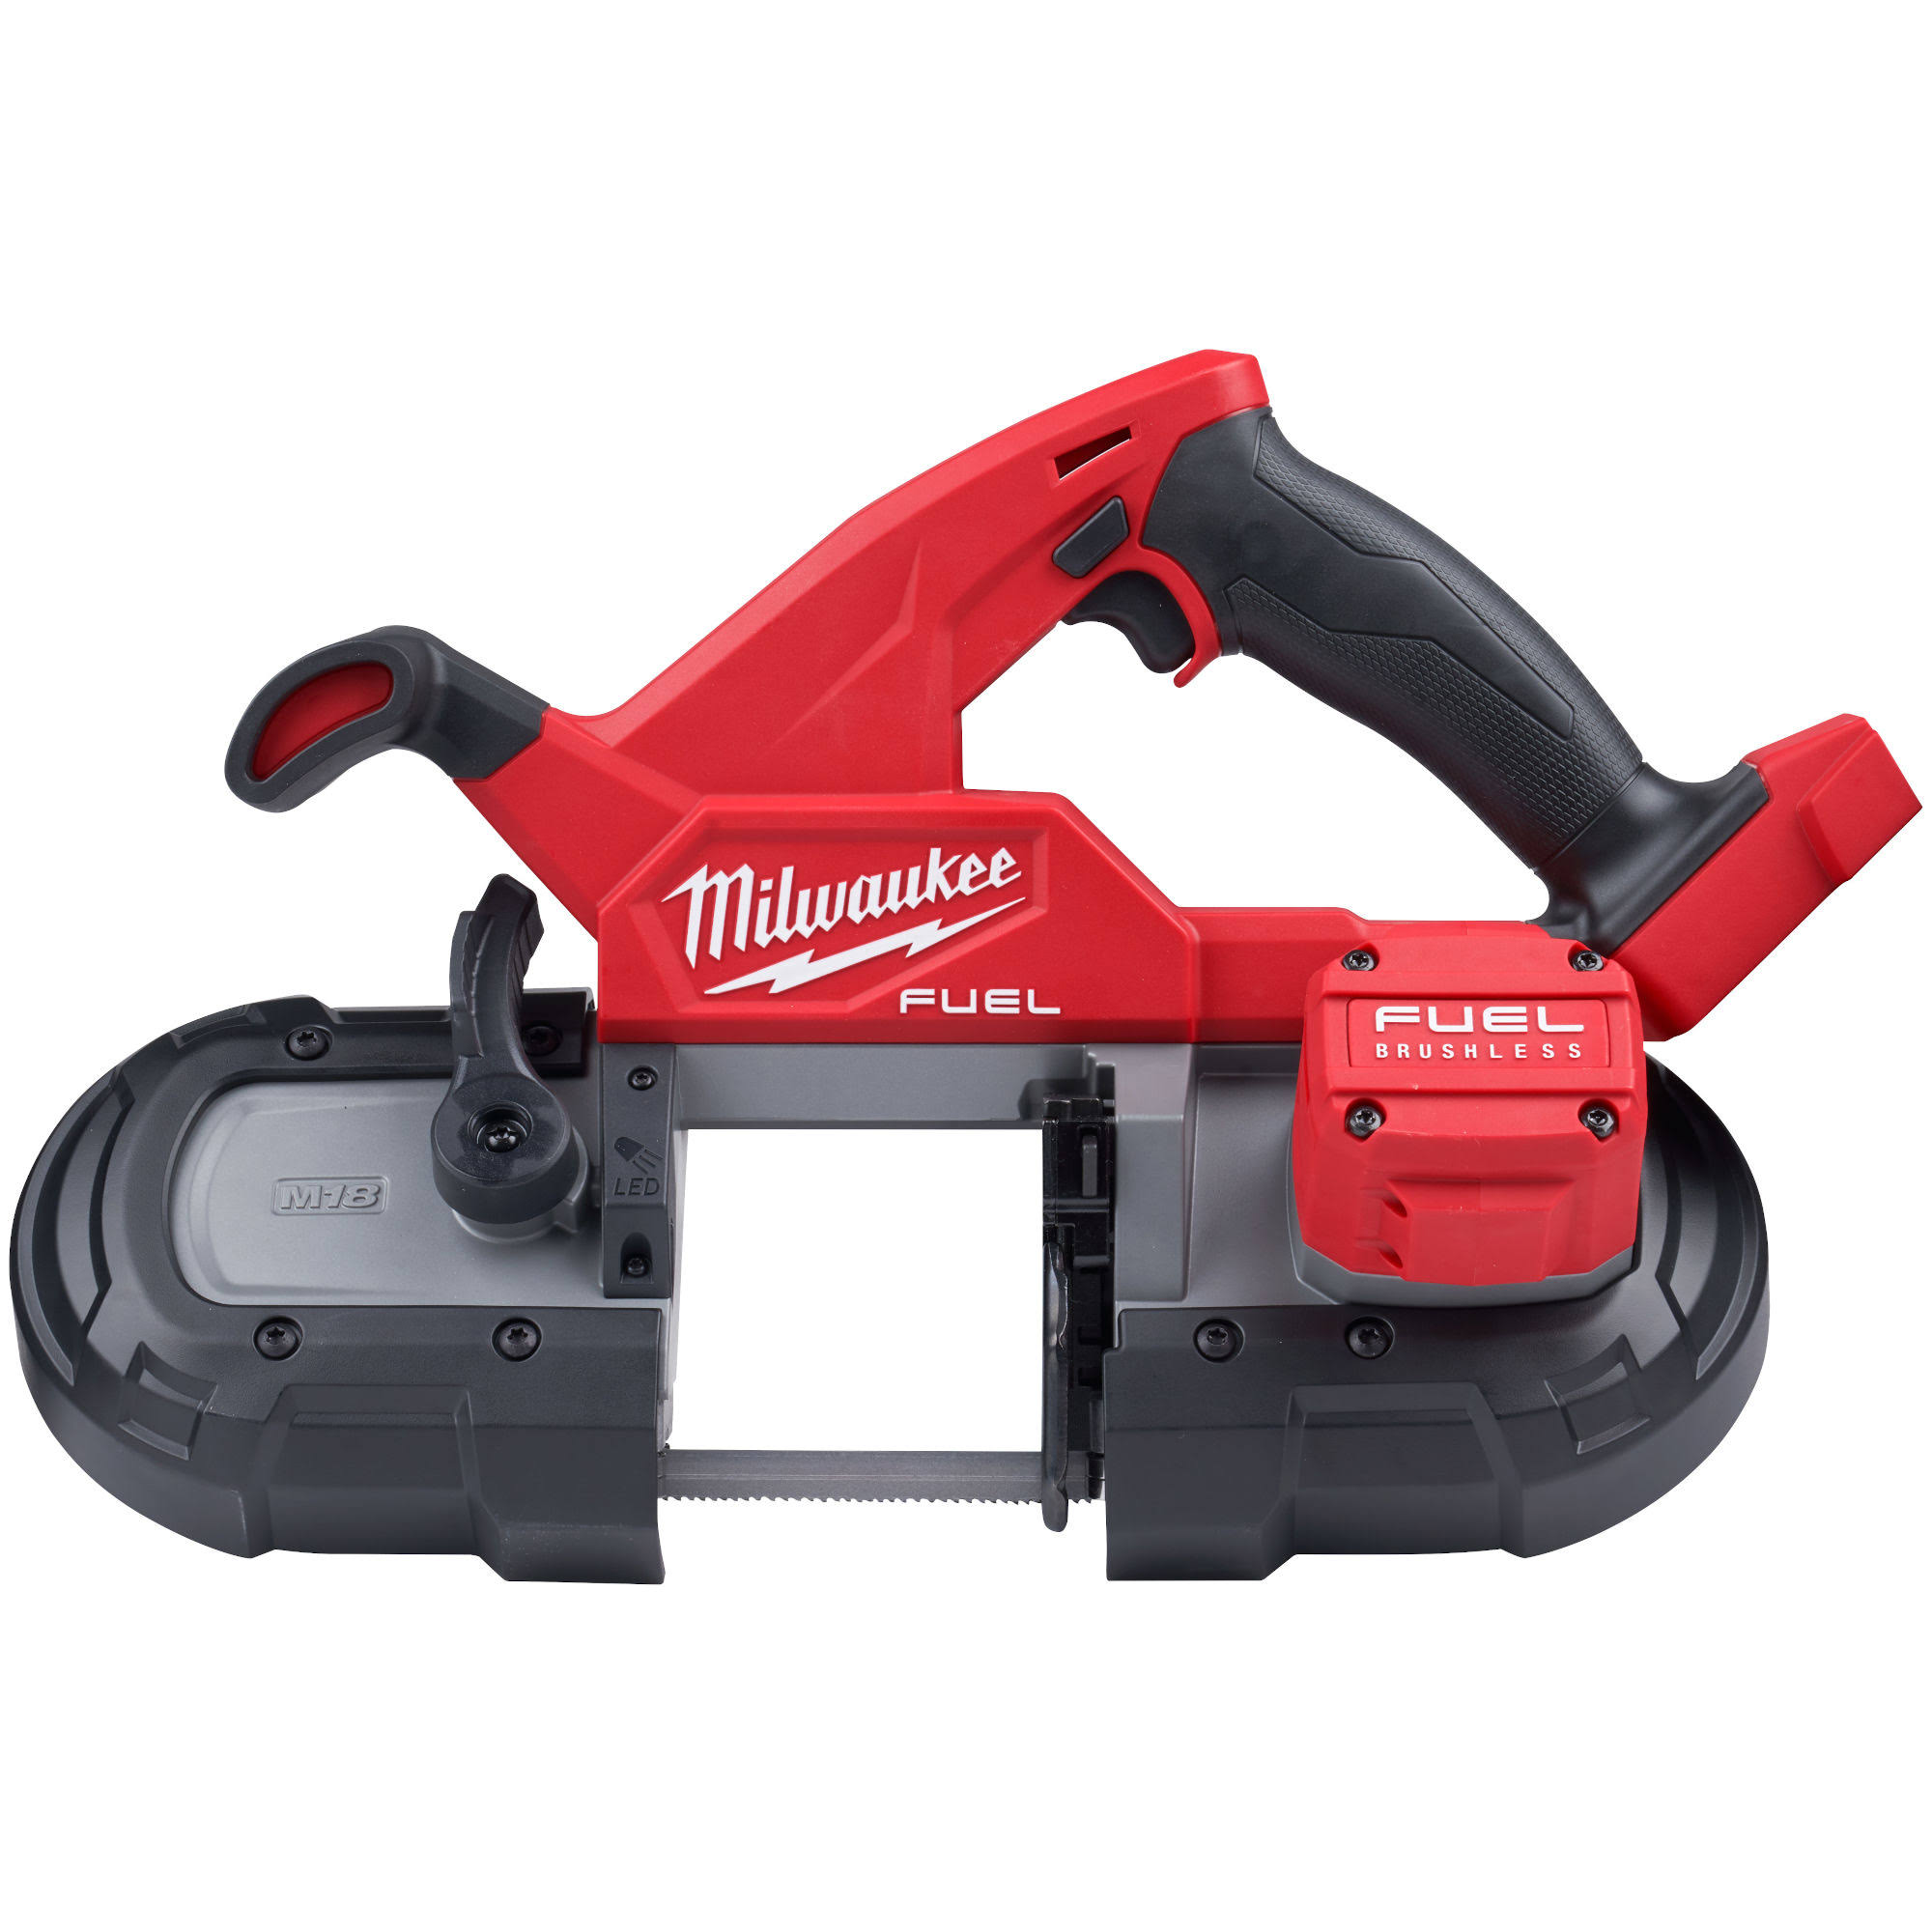 Milwaukee 2829-20 M18 Fuel Compact Band Saw (Tool Only)